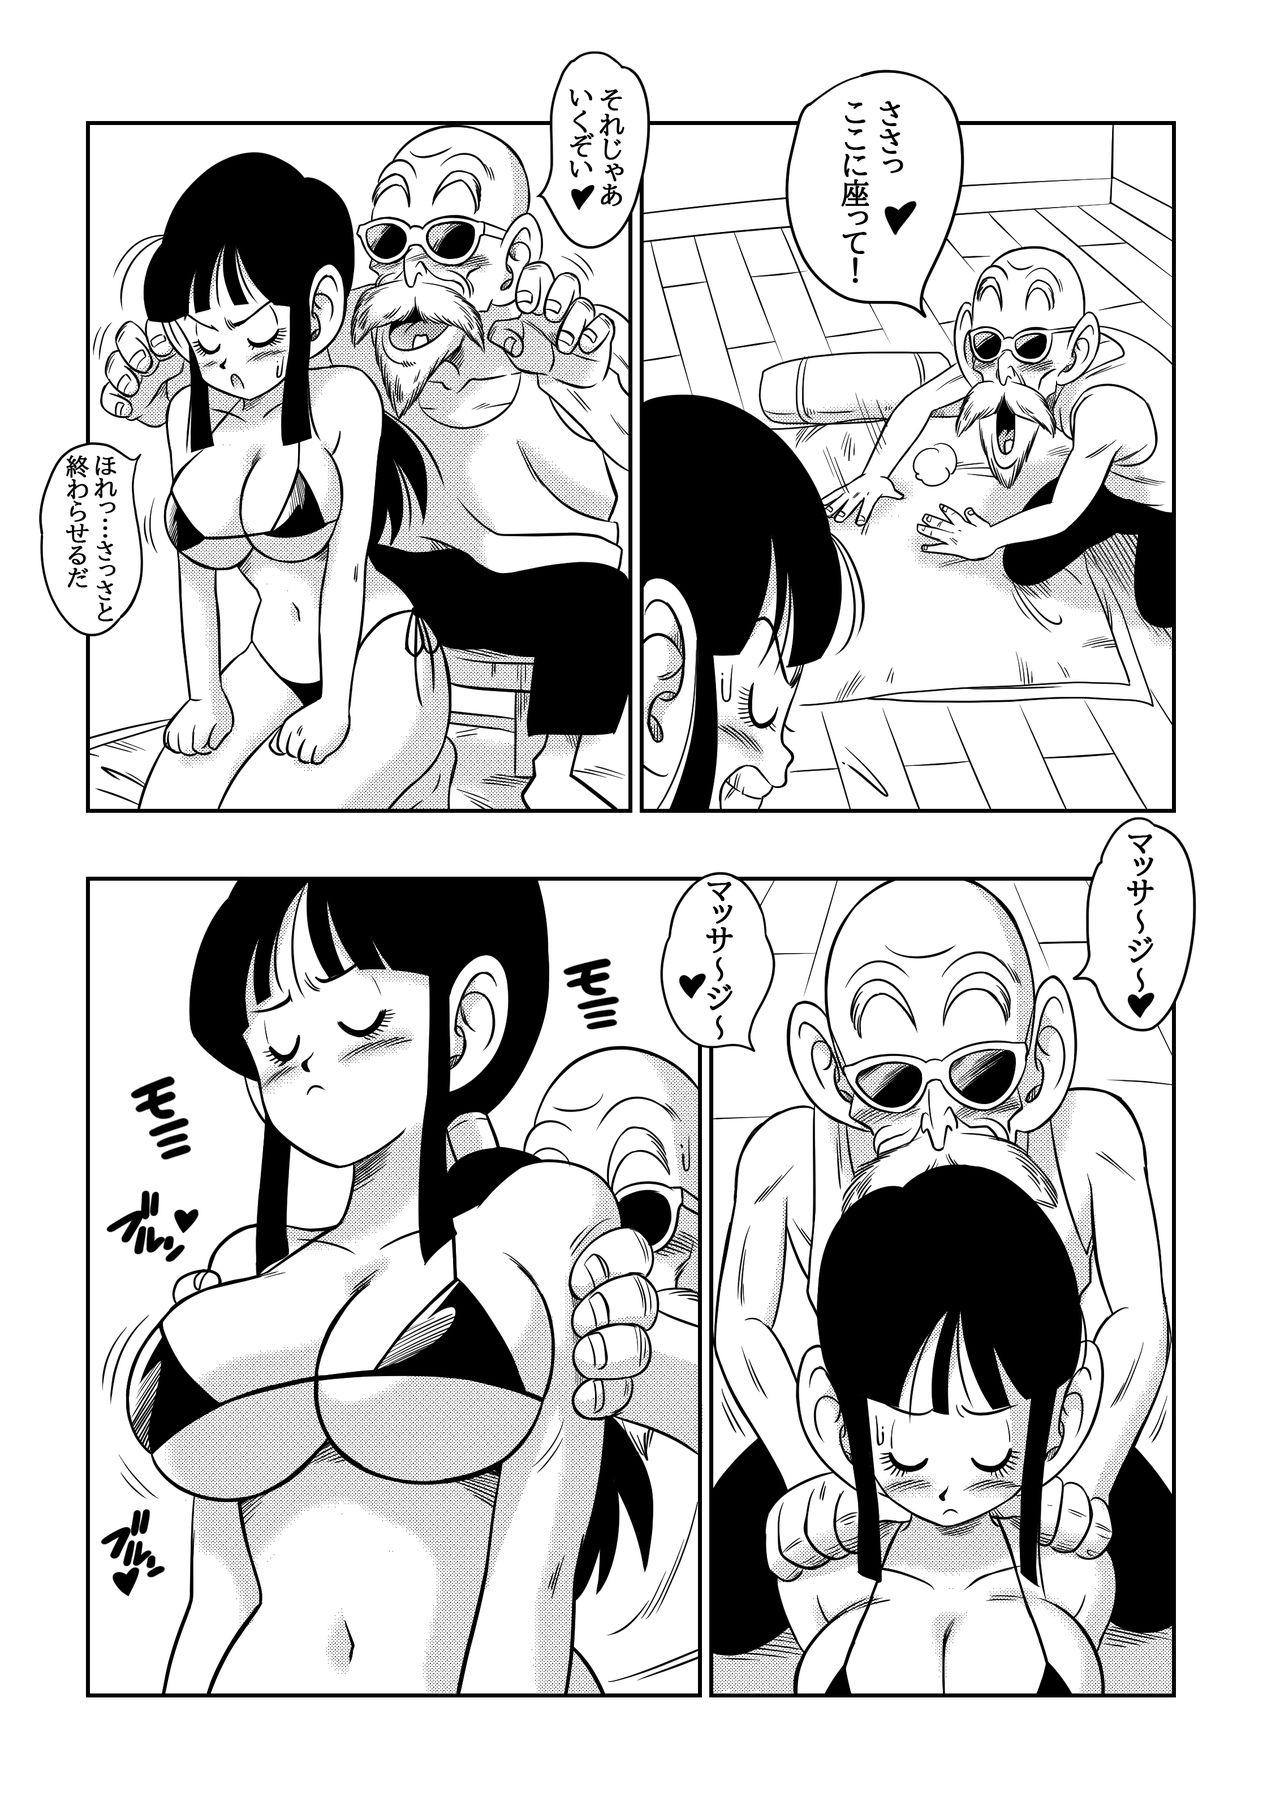 Gorgeous "An Ancient Tradition" - Young Wife is Harassed! - Dragon ball z Master - Page 8